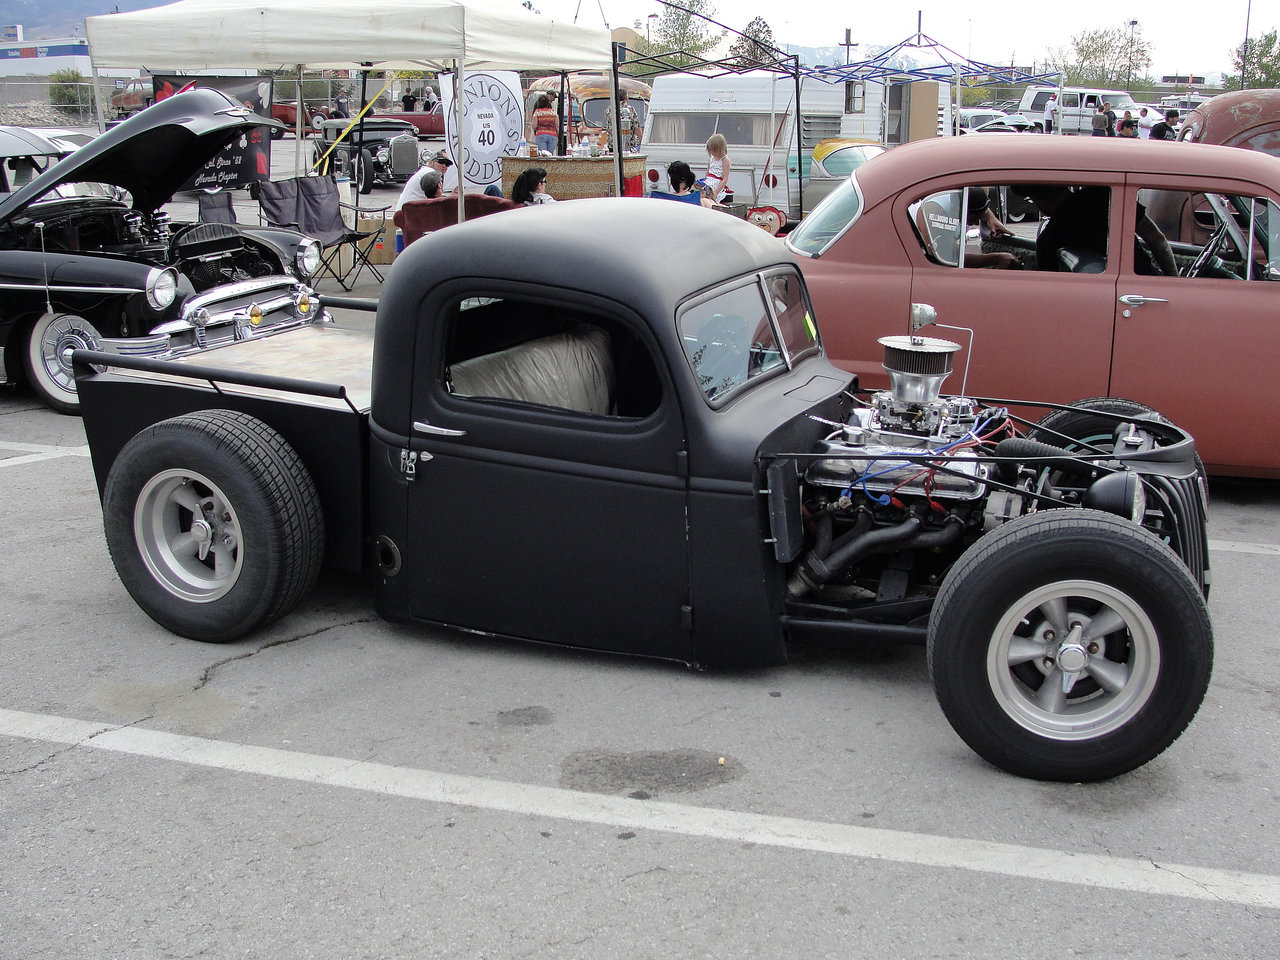 Hot Rod Picture - Image Abyss